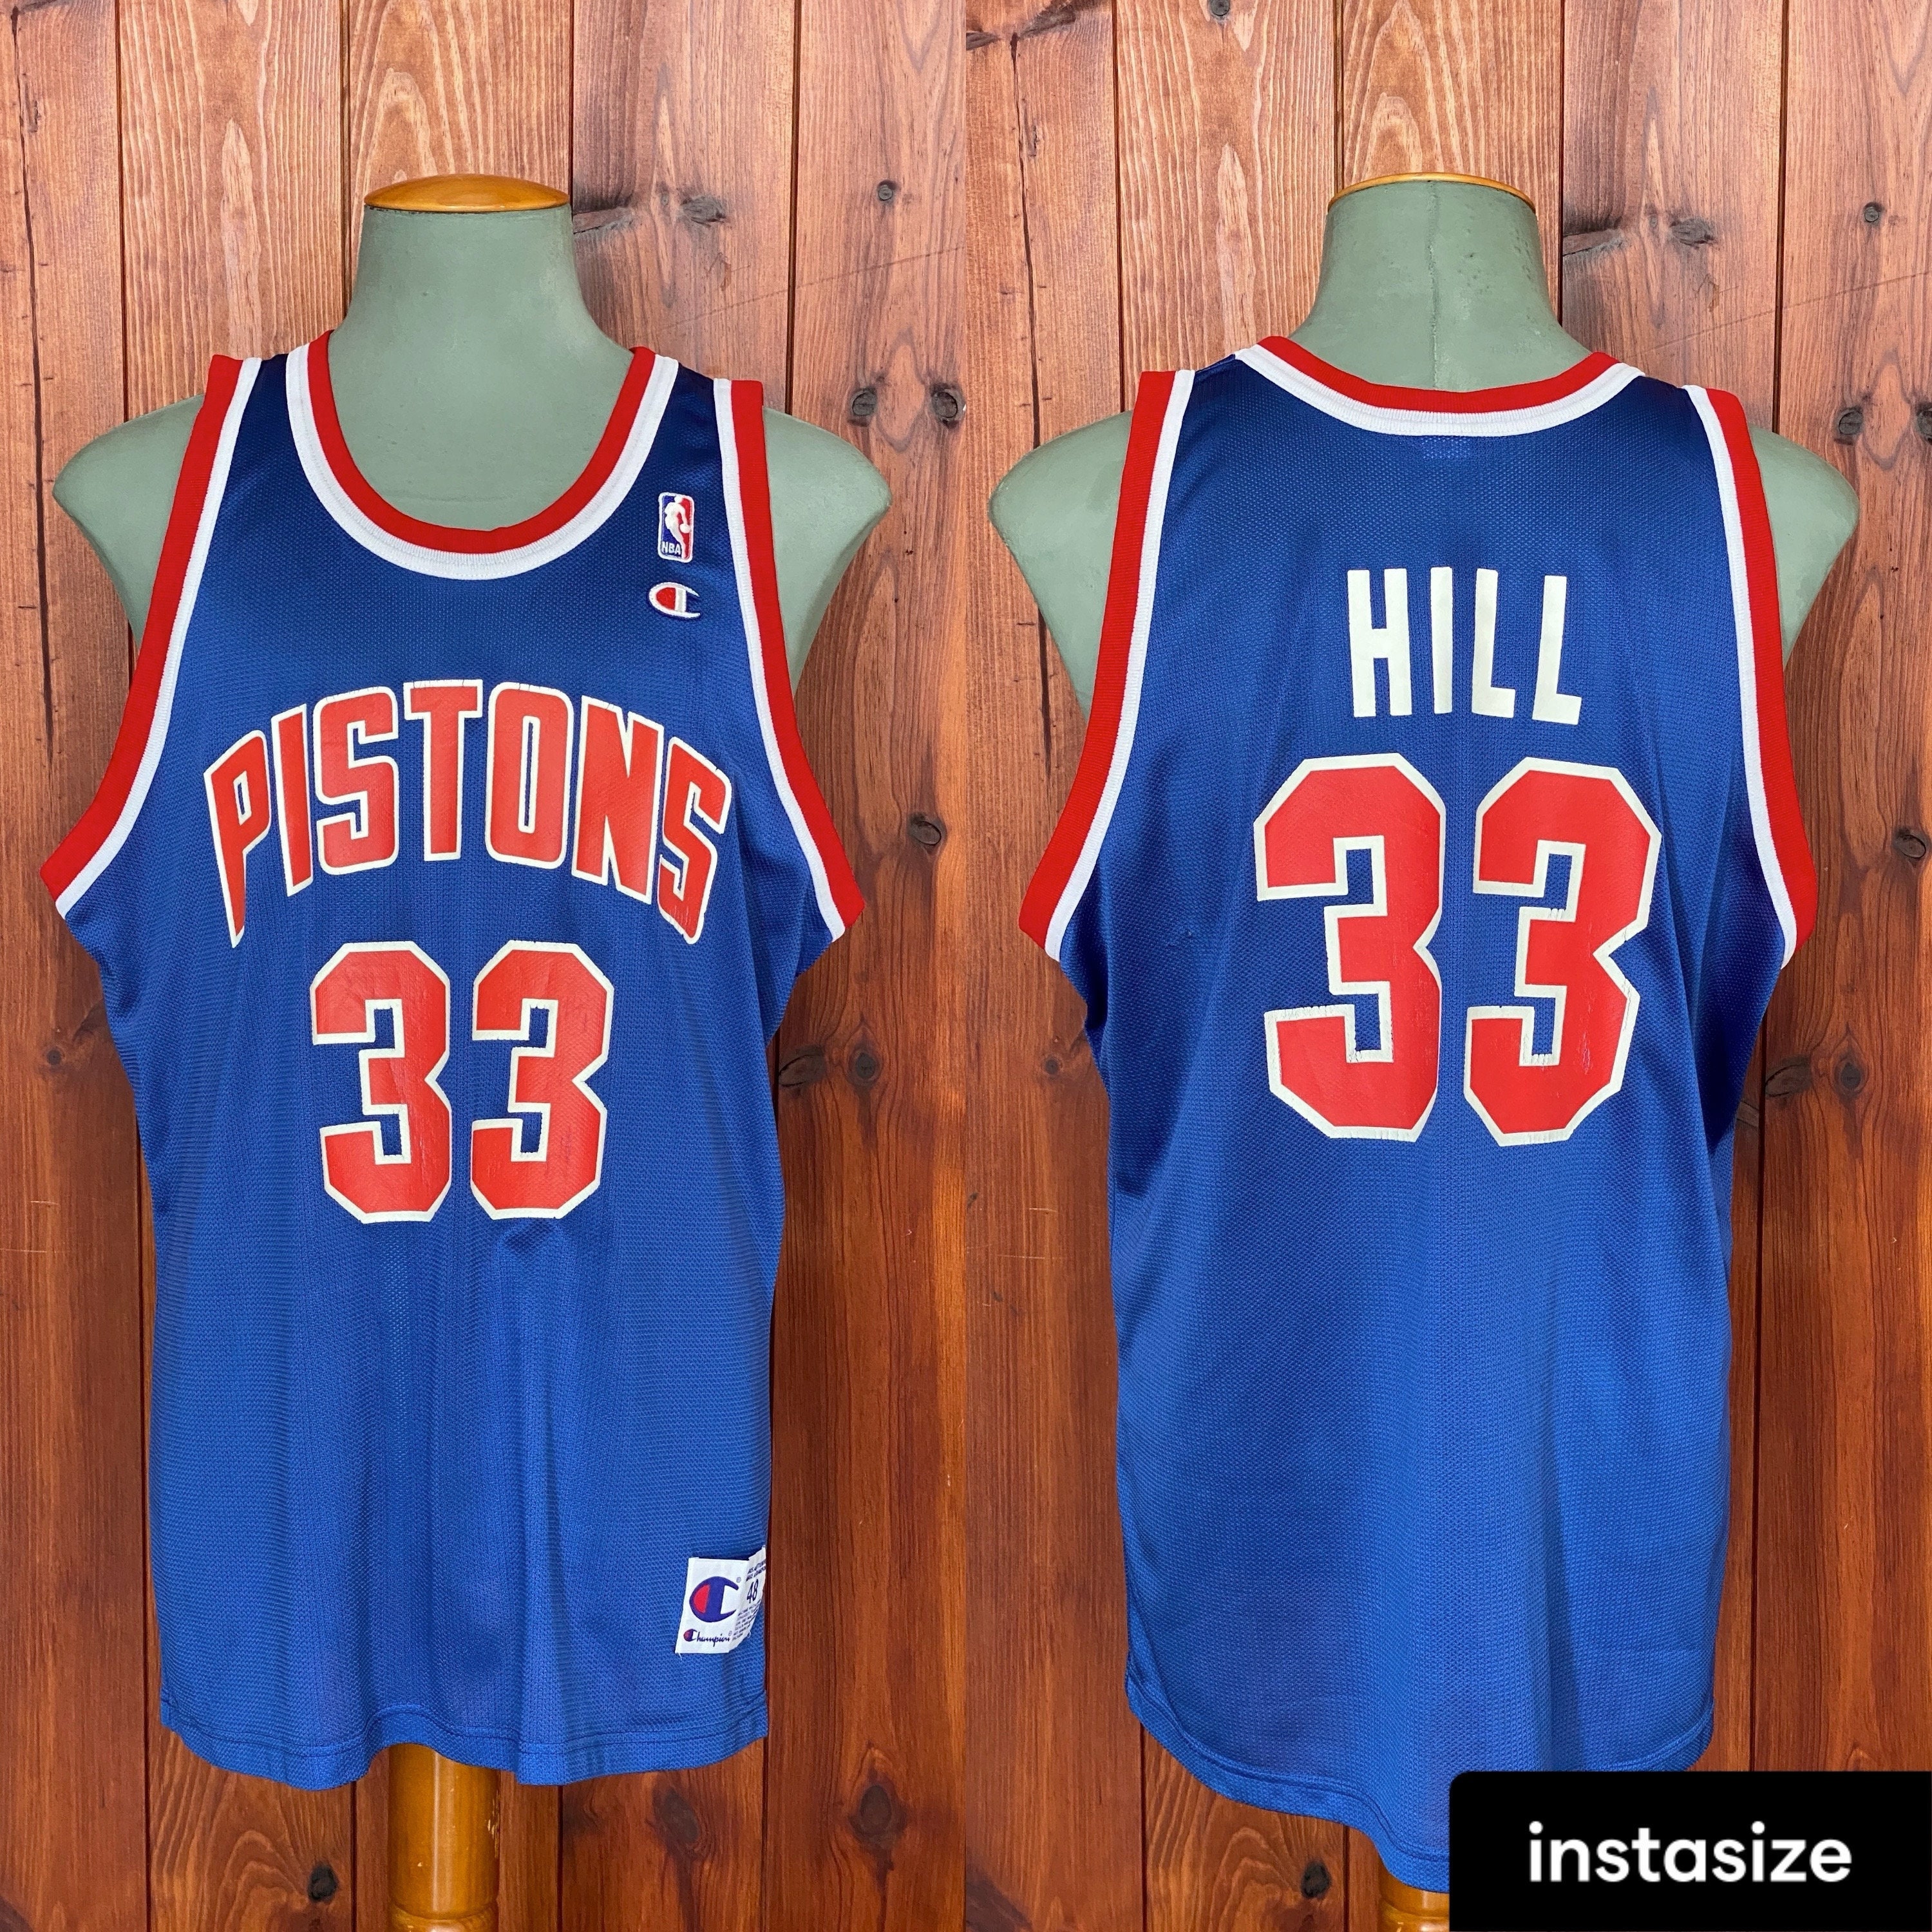 Vintage 80s/90s Isiah Thomas Pistons Throwback Jersey By Reebok